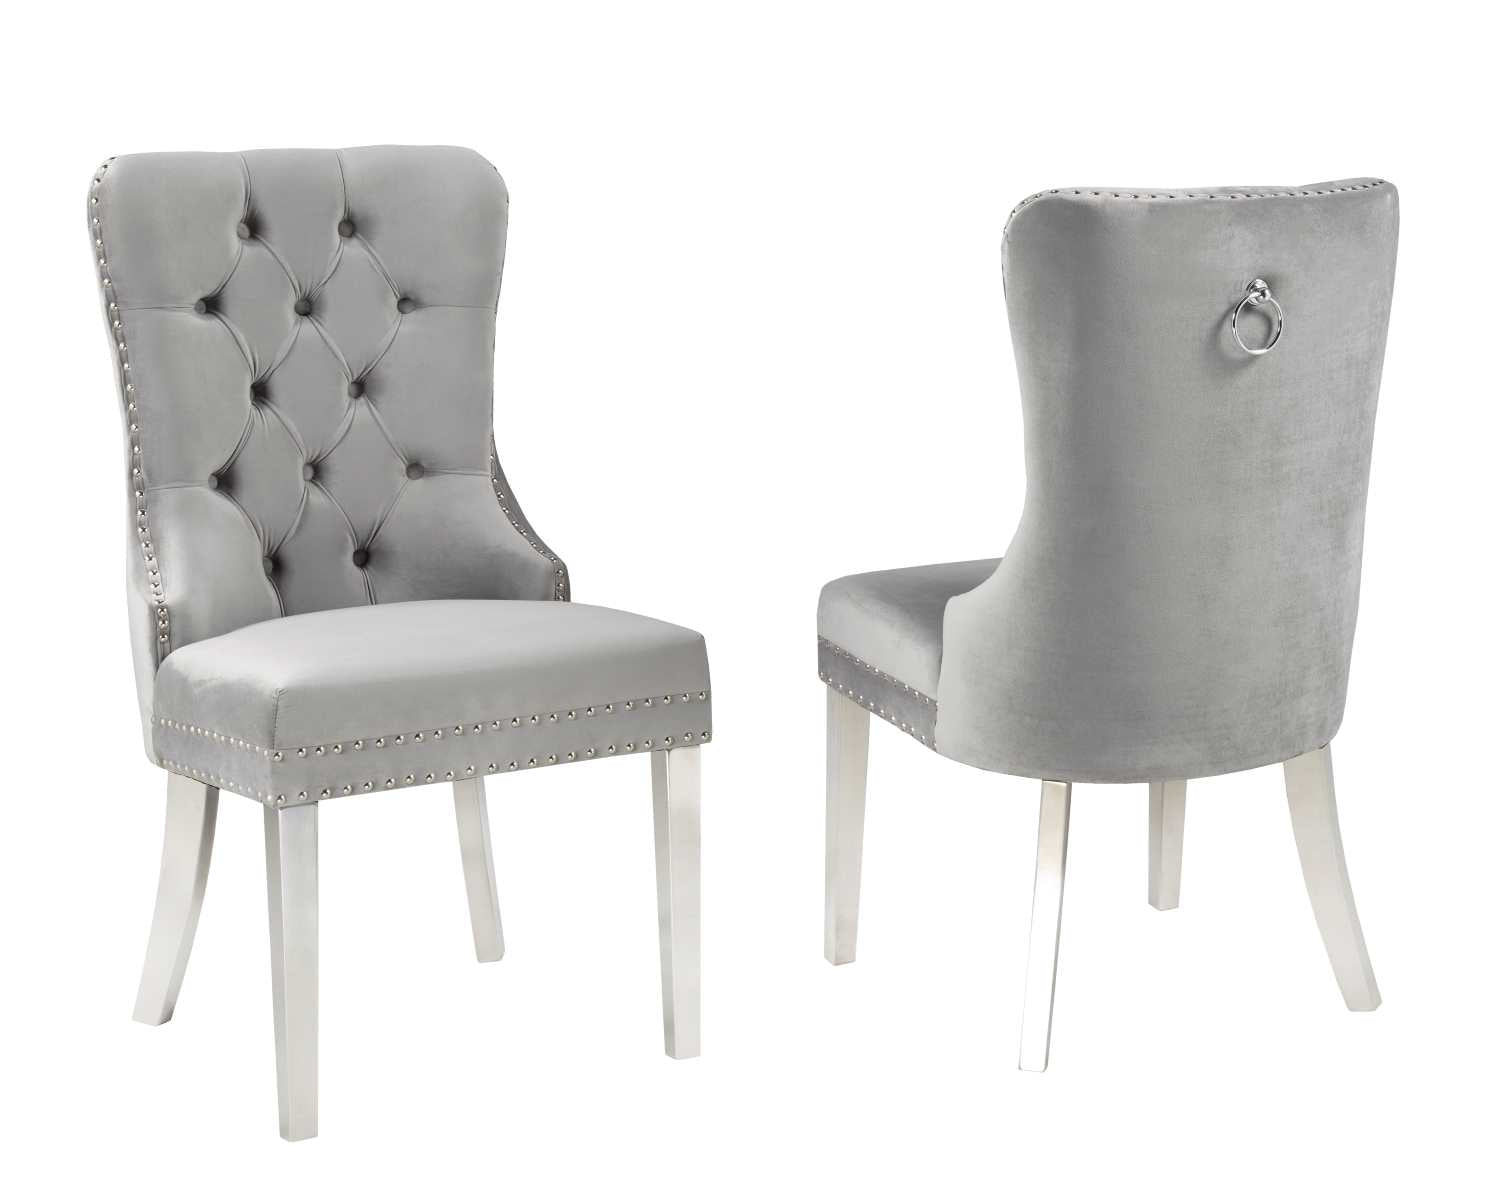 Grey Dining Chair W/ Chrome Legs F459-GY (Set of 2)